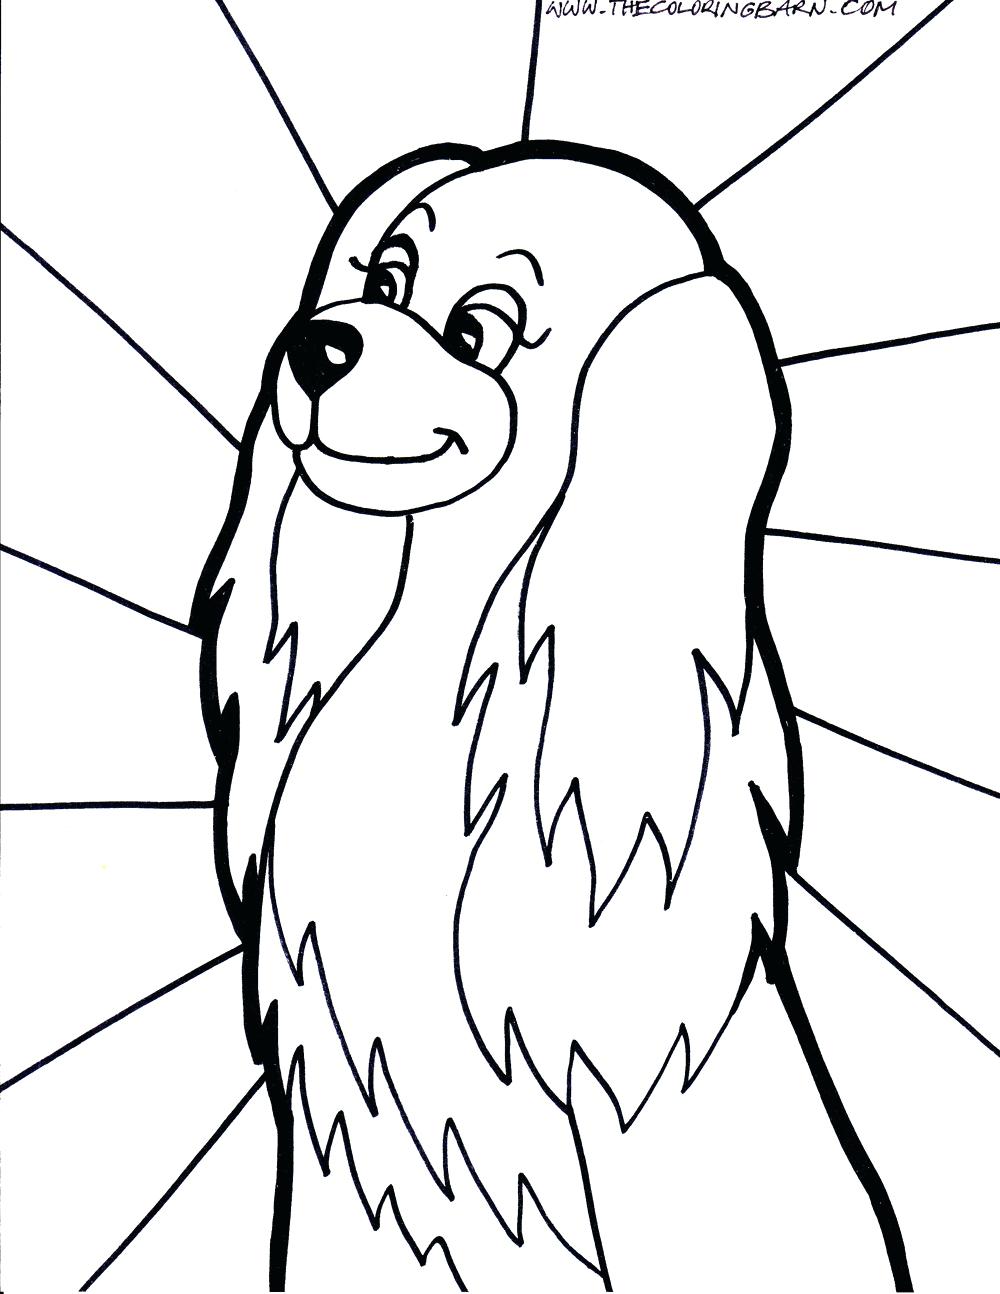 Cute Cartoon Dog Coloring Pages at GetColorings.com | Free printable